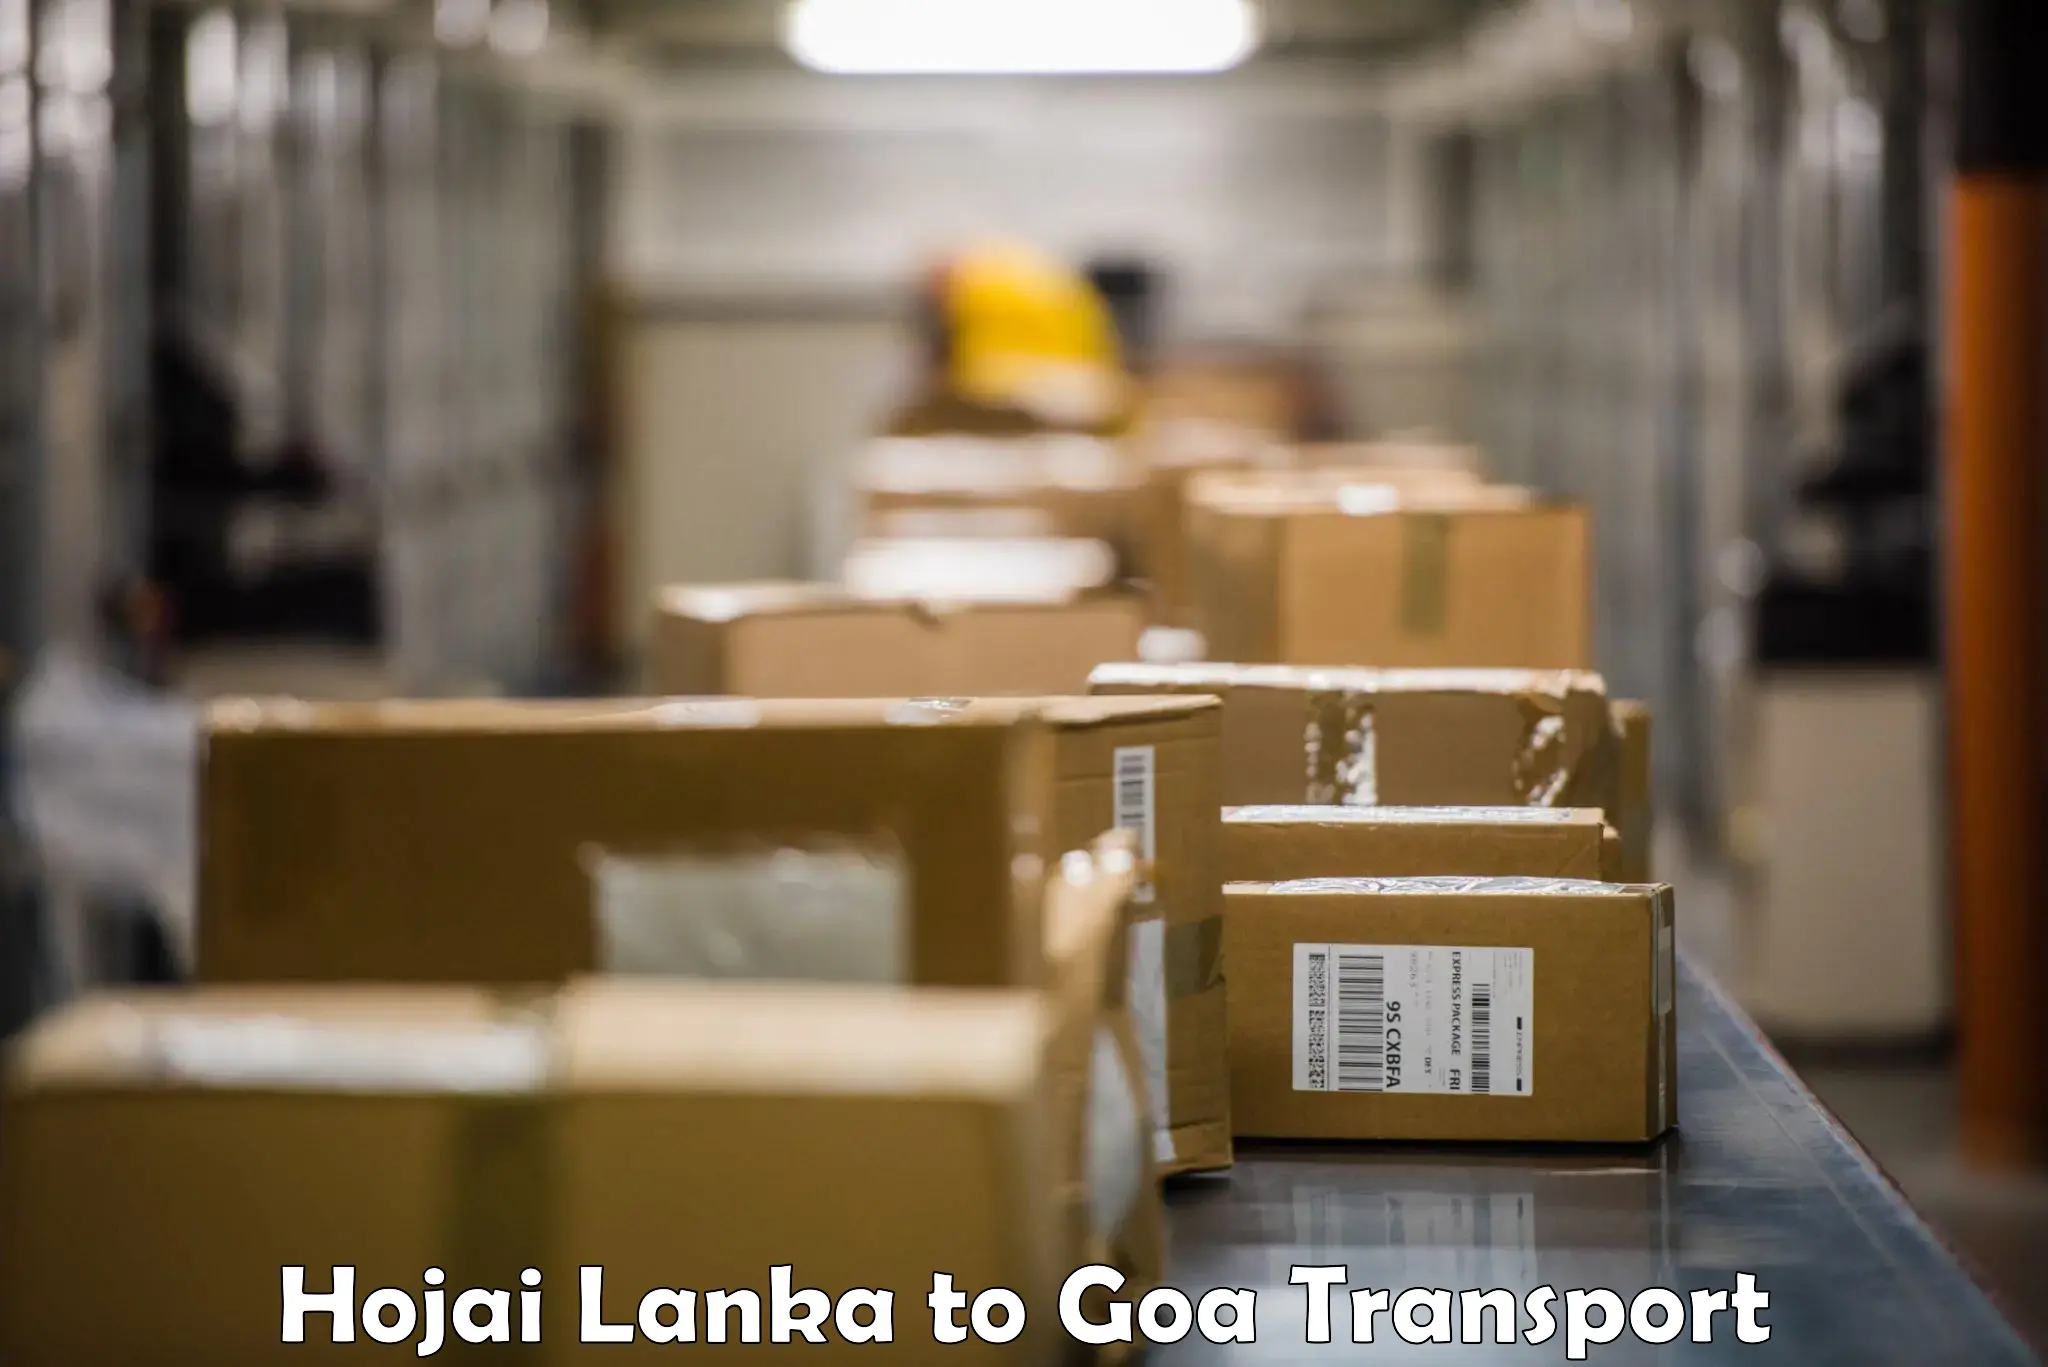 Container transport service Hojai Lanka to South Goa